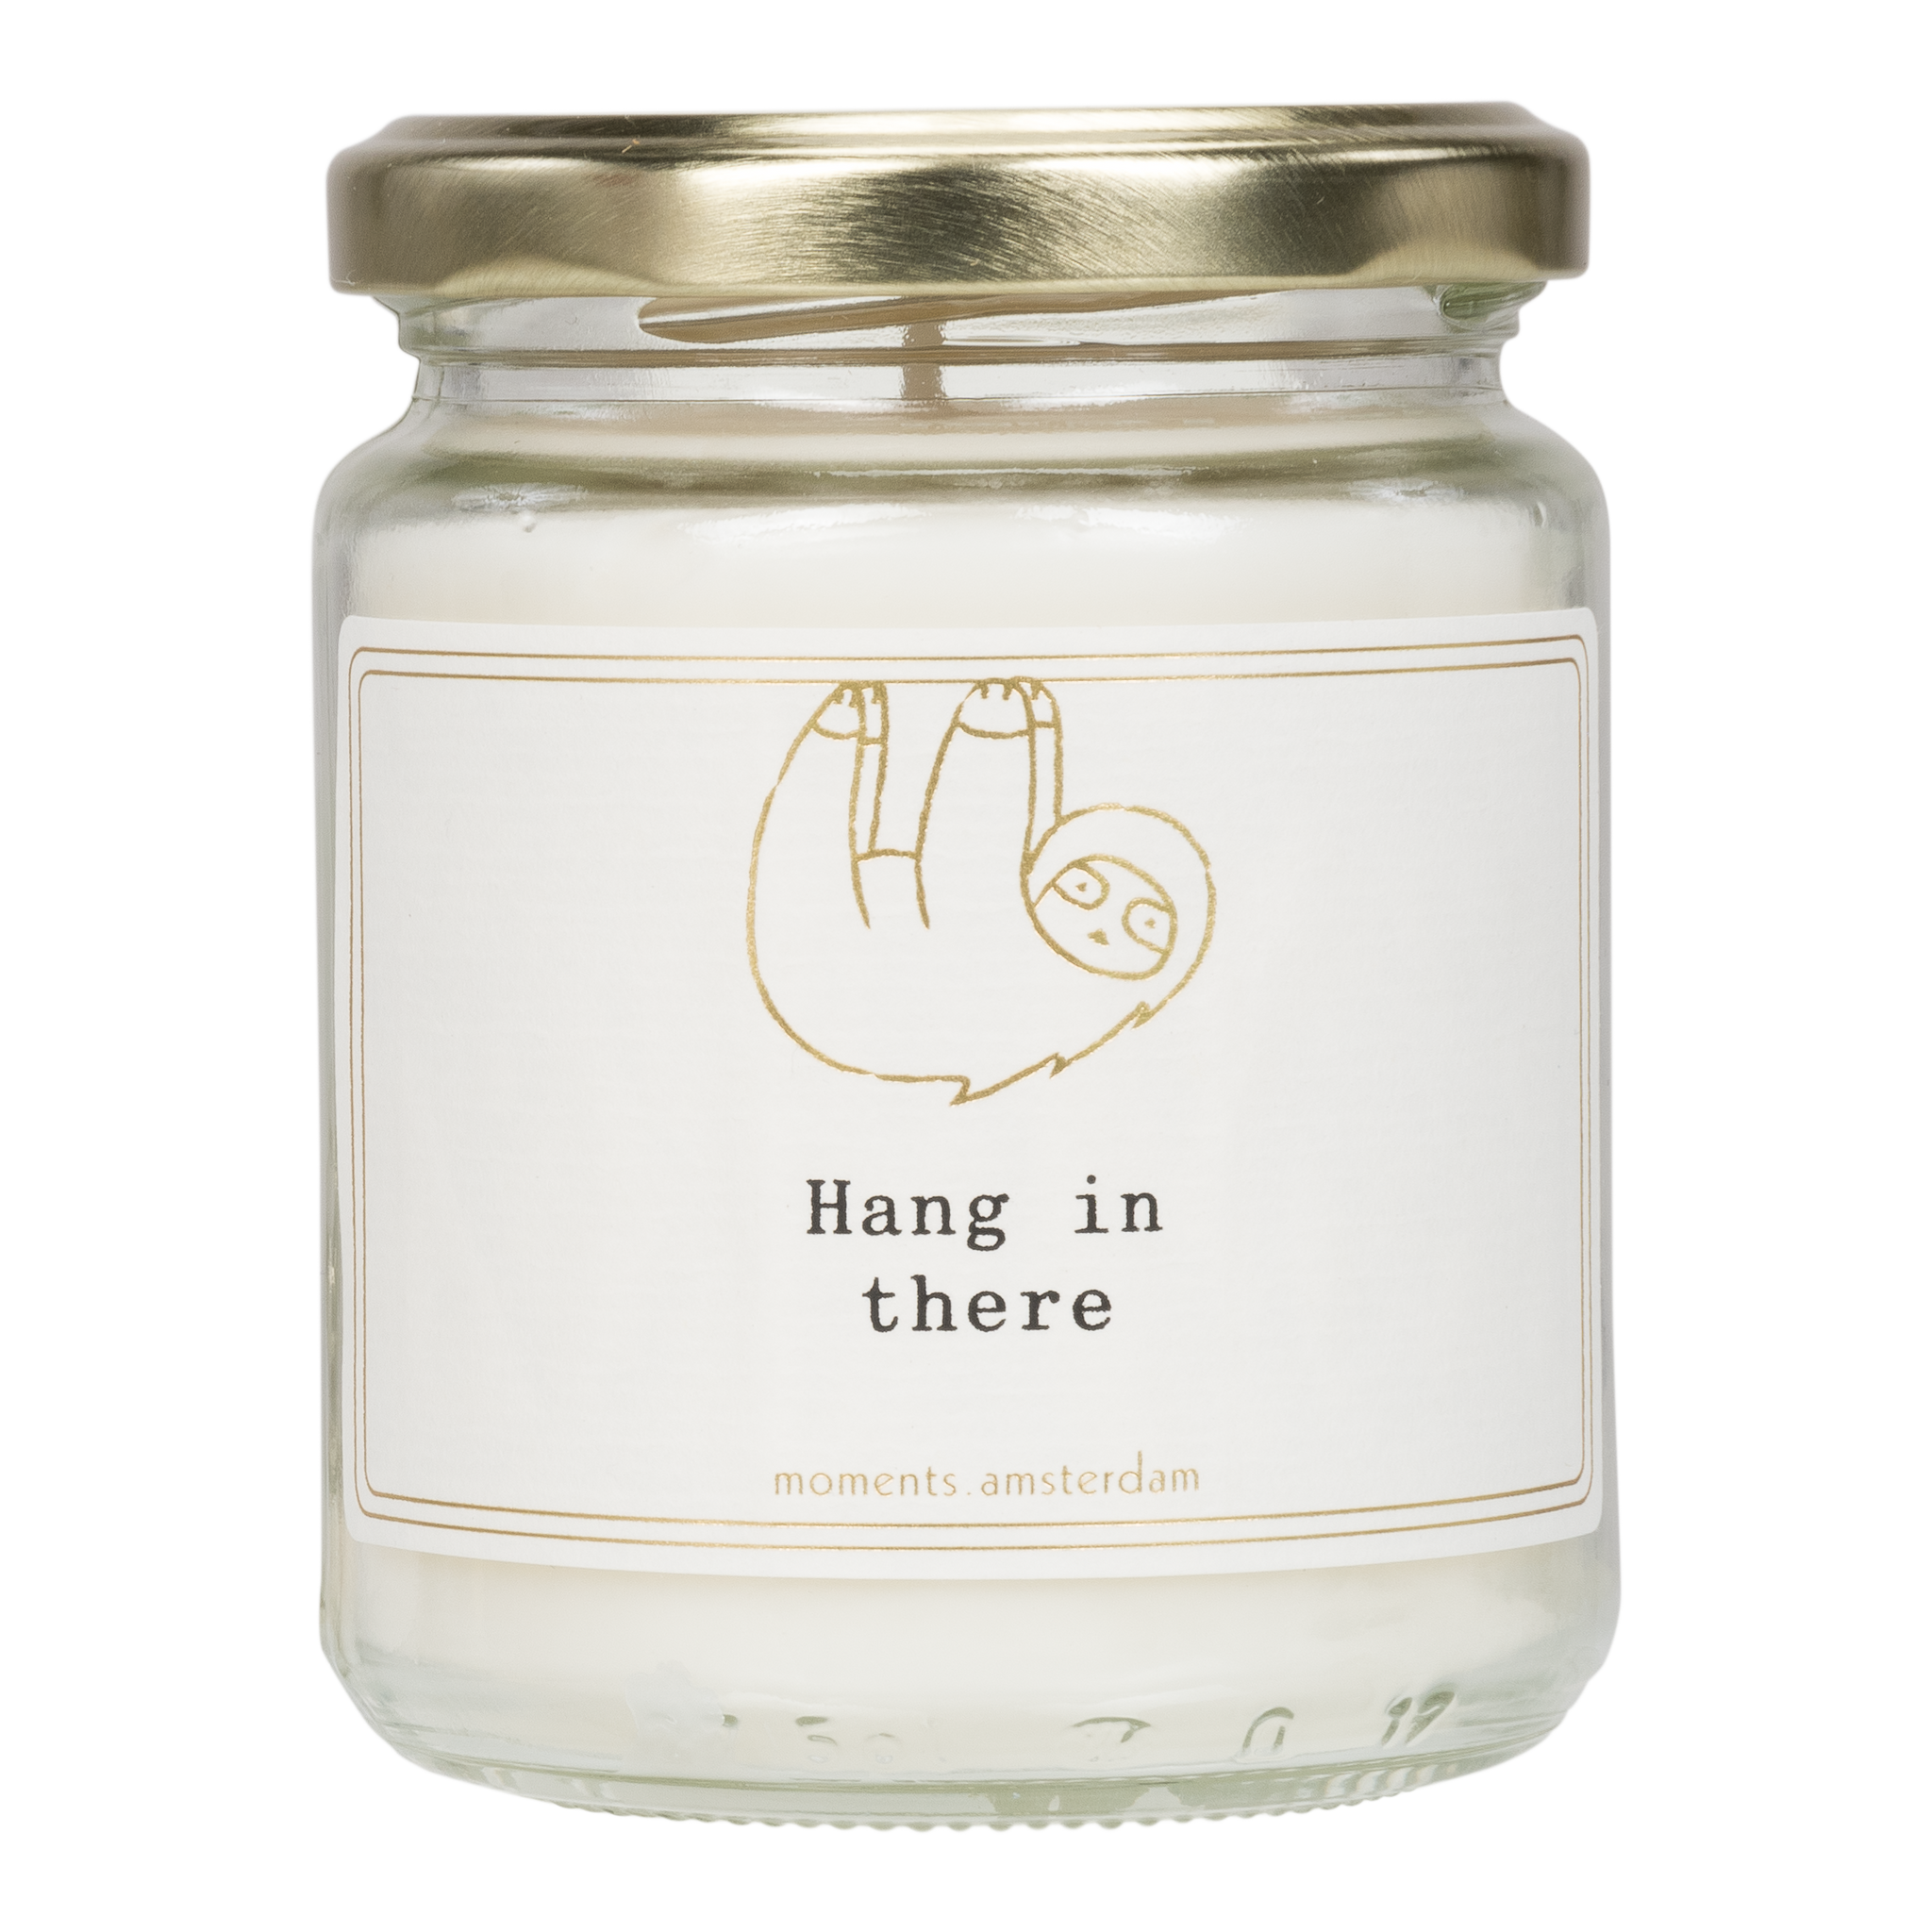 Hang in there scented candle